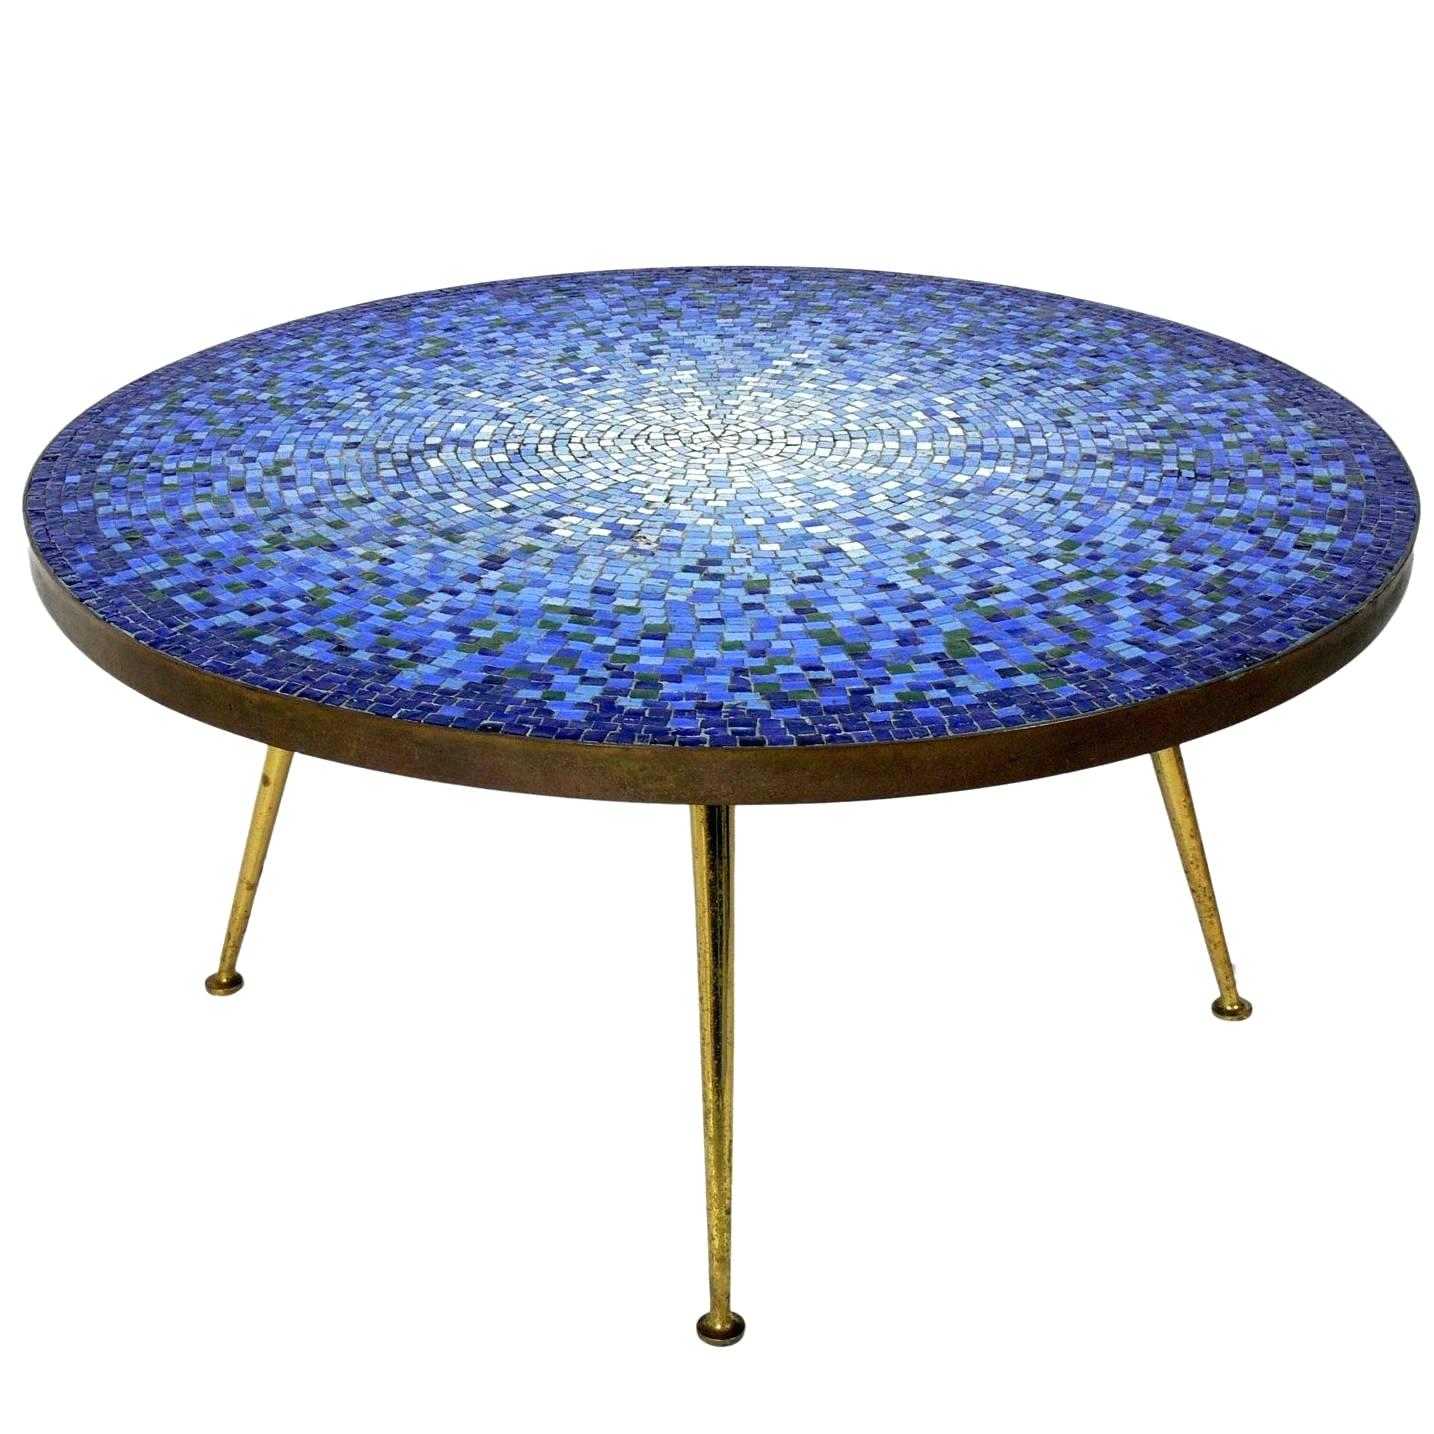 mosaic tile coffee table extraordinary top patterns the glass for outdoor accent hammered drum side with wheels drop leaf kitchen and chairs cymbal bag mirror laminate flooring